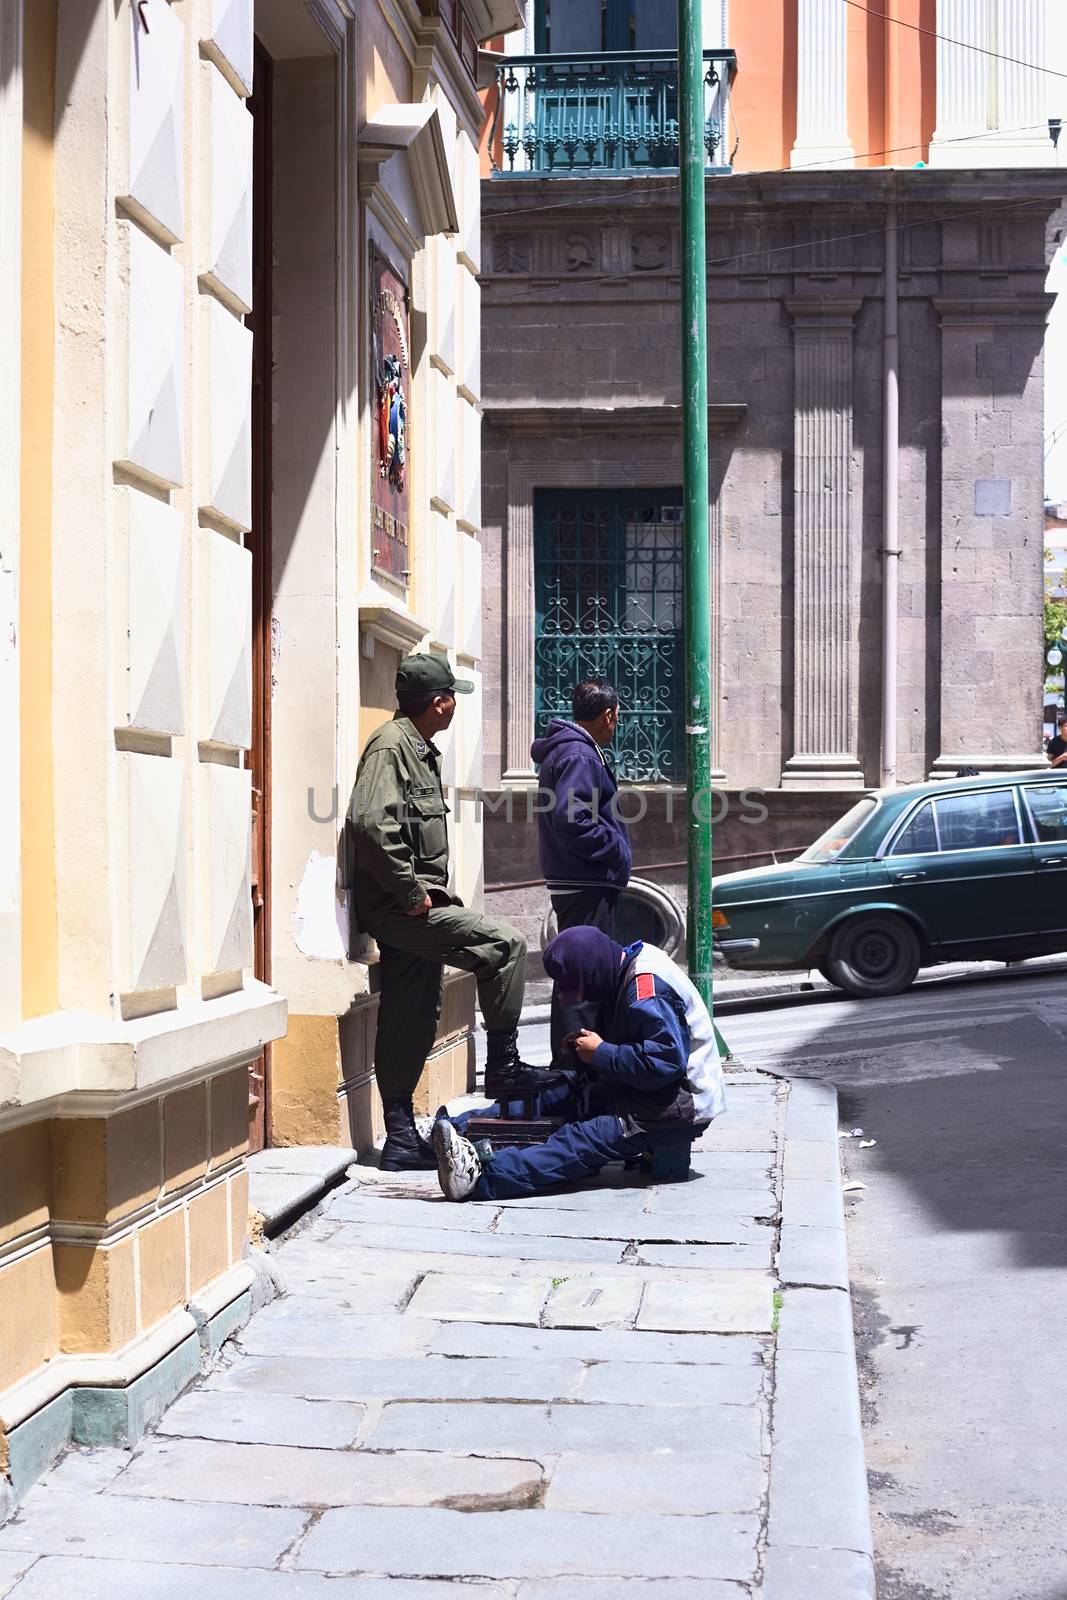 LA PAZ, BOLIVIA - OCTOBER 11, 2014: Unidentified shoeblack cleaning the boots of a man in uniform at the corner of the streets Bolivar and Comercio in the city center on Octobr 11, 2014 in La Paz, Bolivia